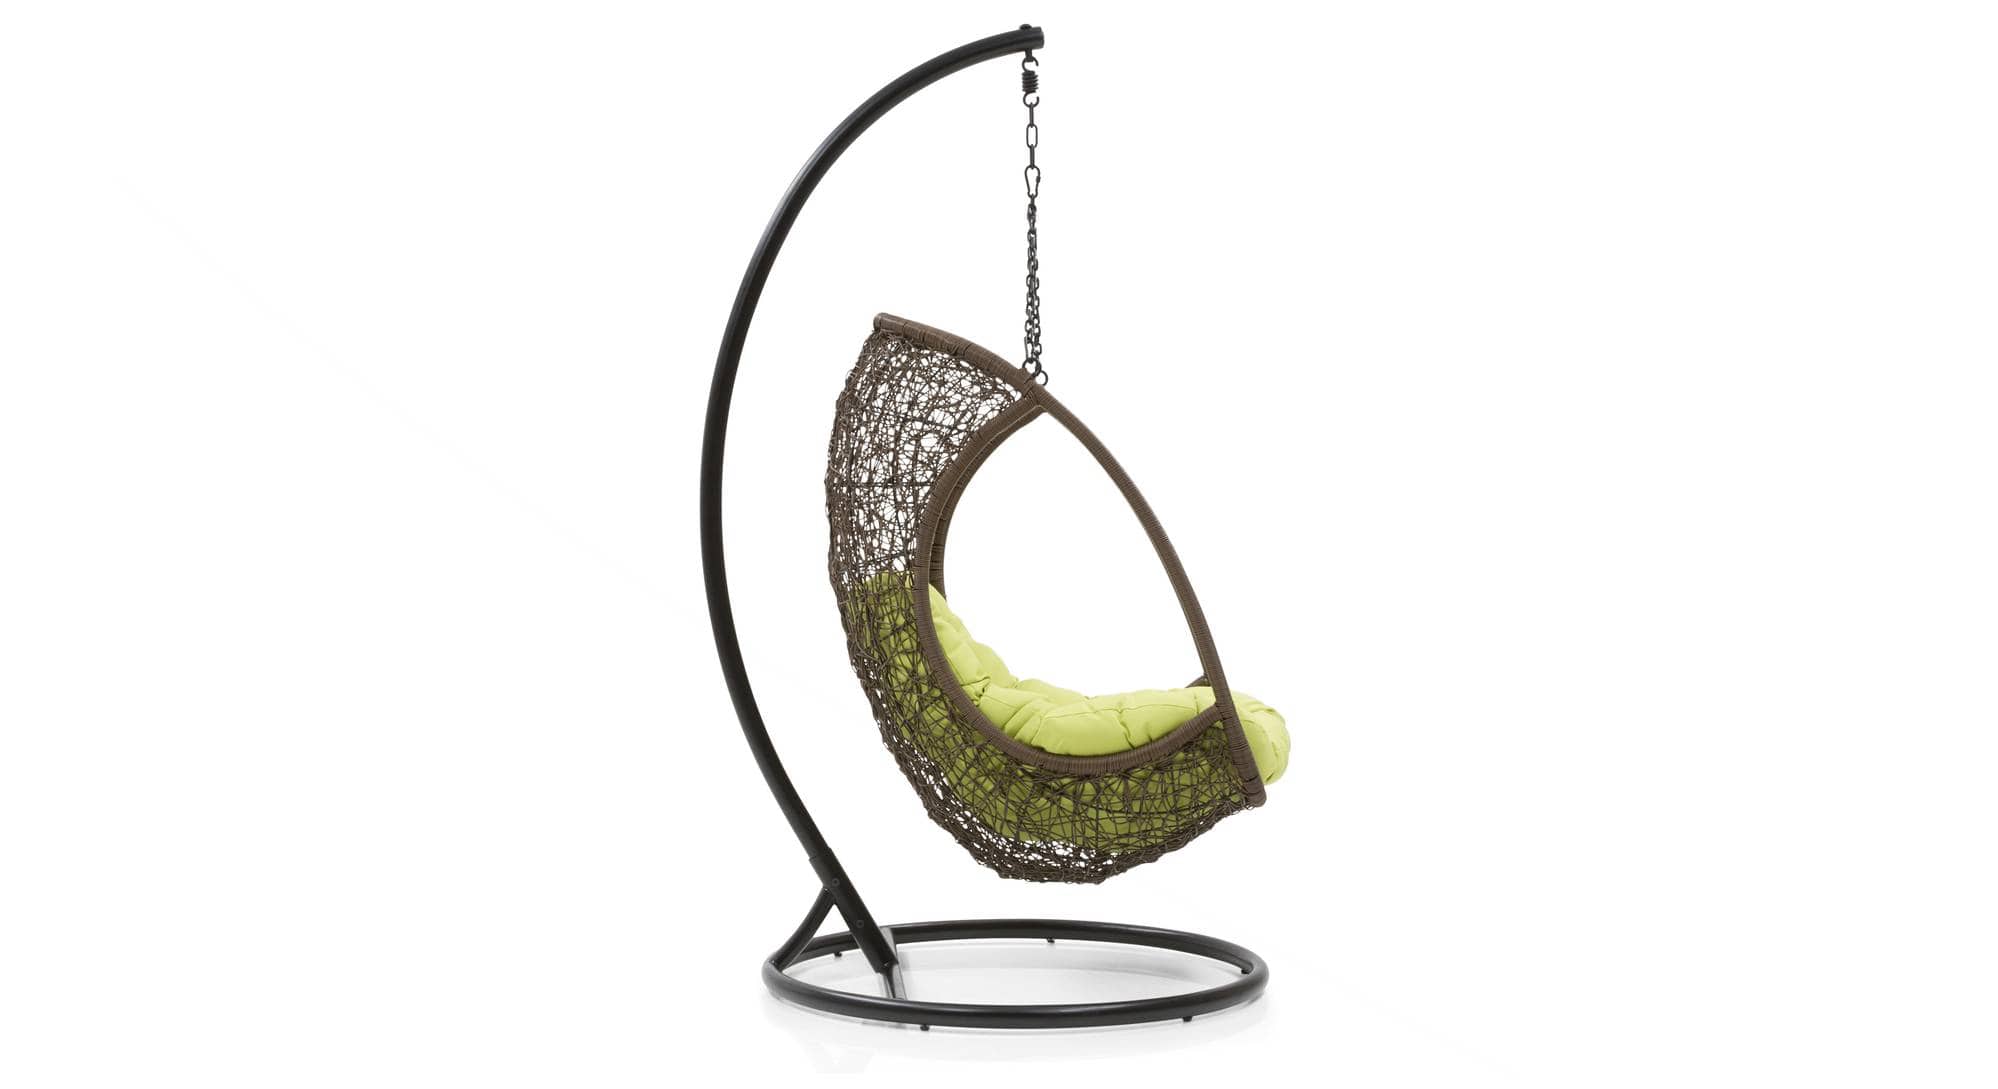 Dreamline Single Seater Hanging Swing With Stand For Balcony & Garden (Brown)